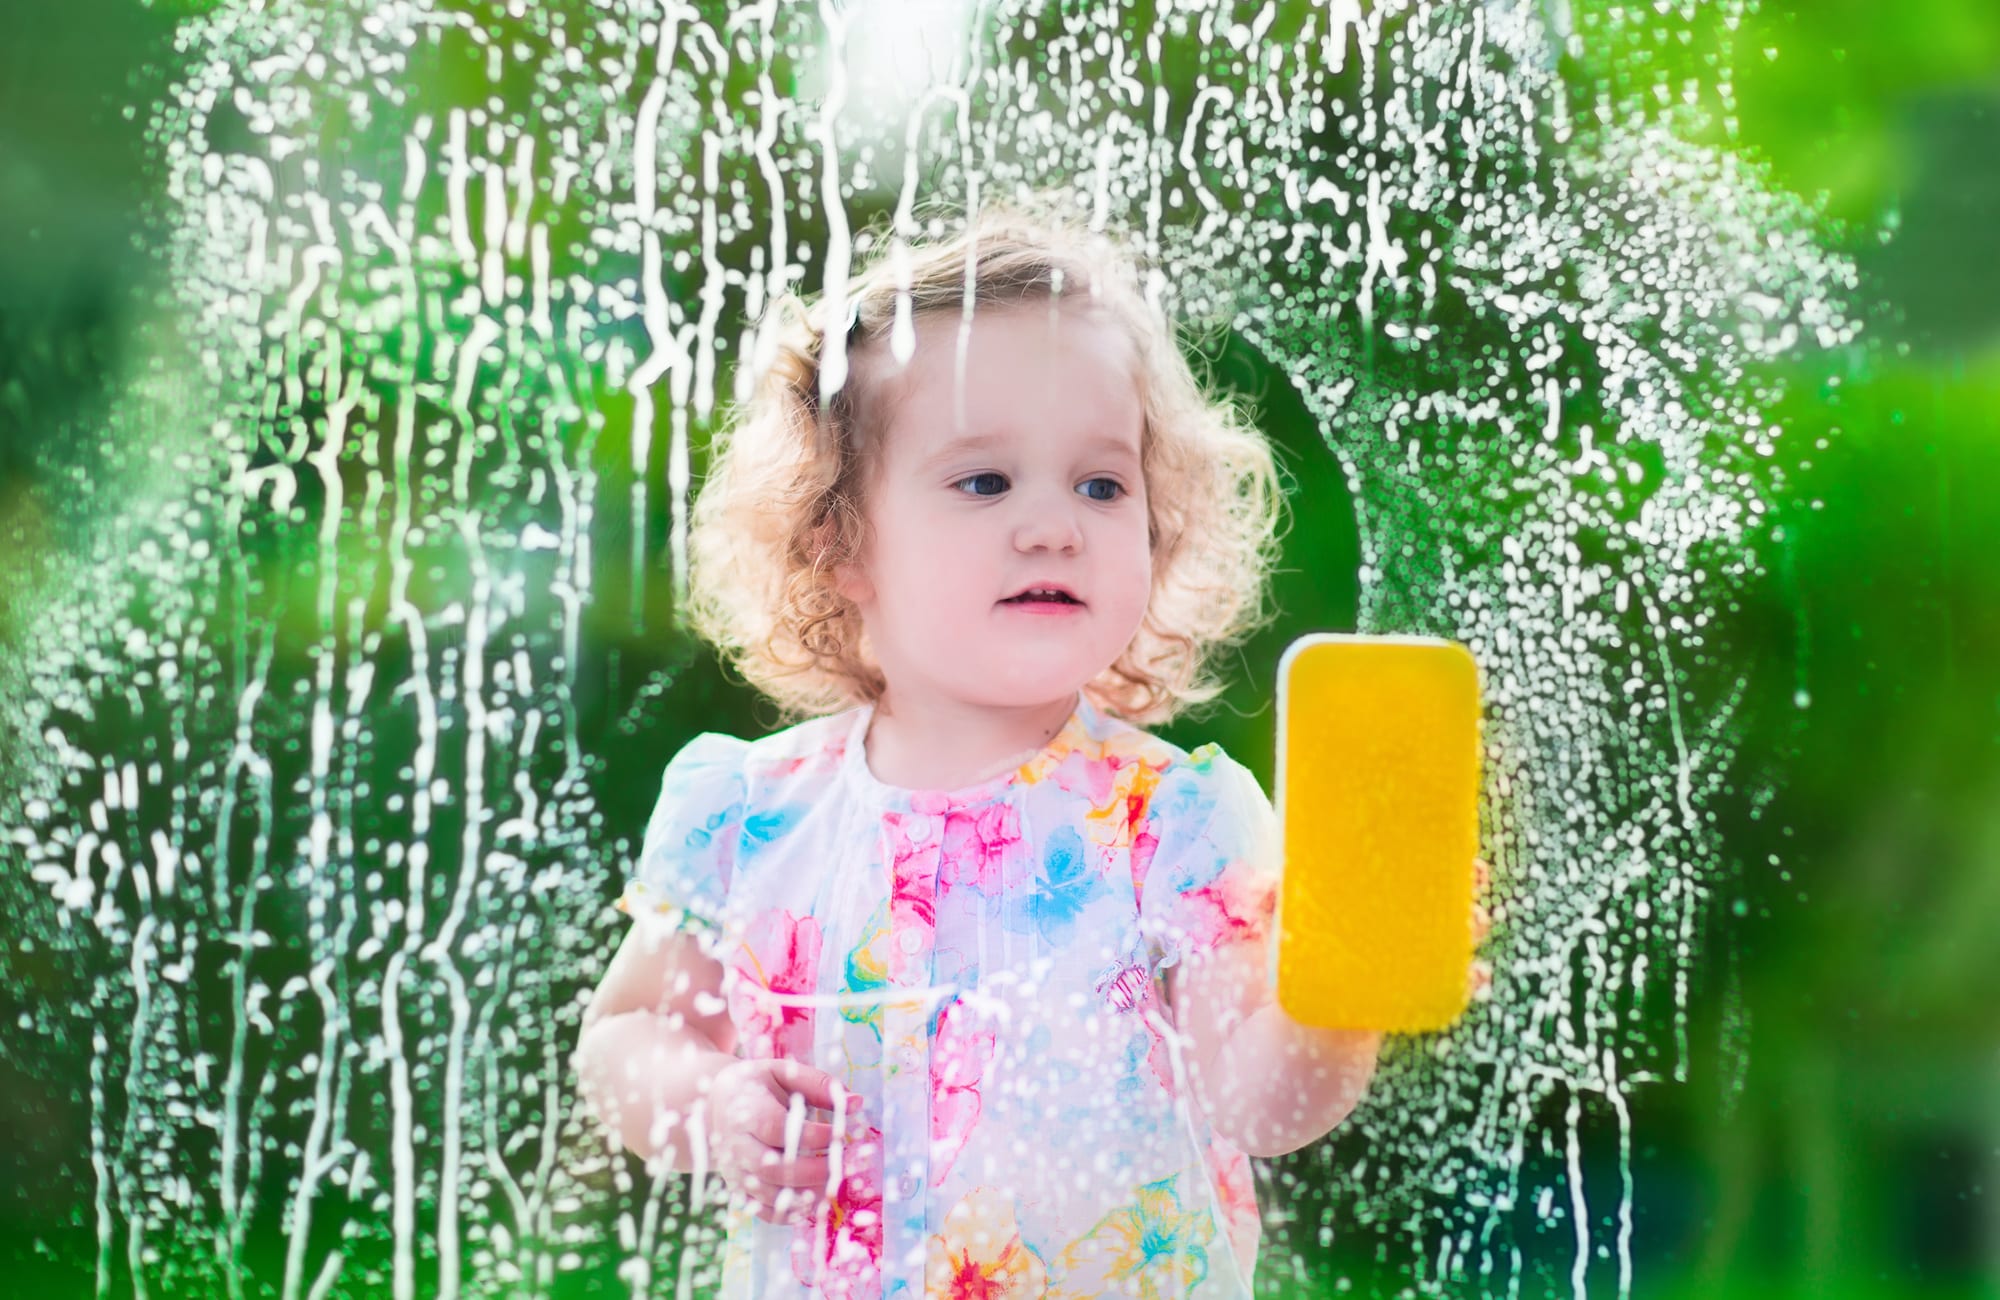 Keep Little Ones Healthy with Baby-Safe Cleaning Products